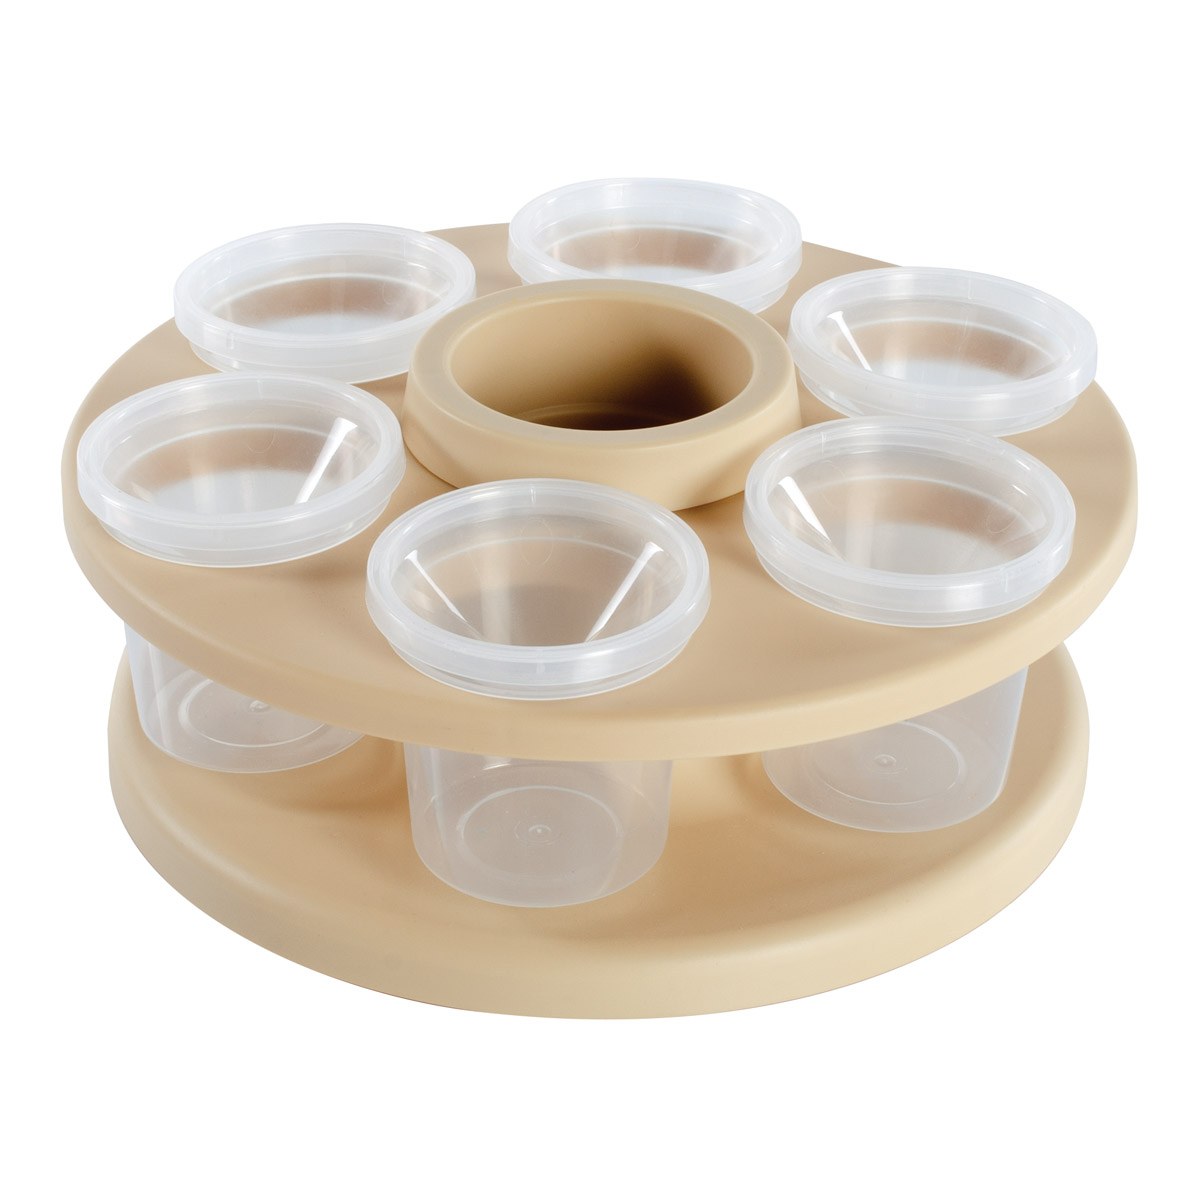 Kaplan Early Learning Company Spinning Tabletop Art Storage